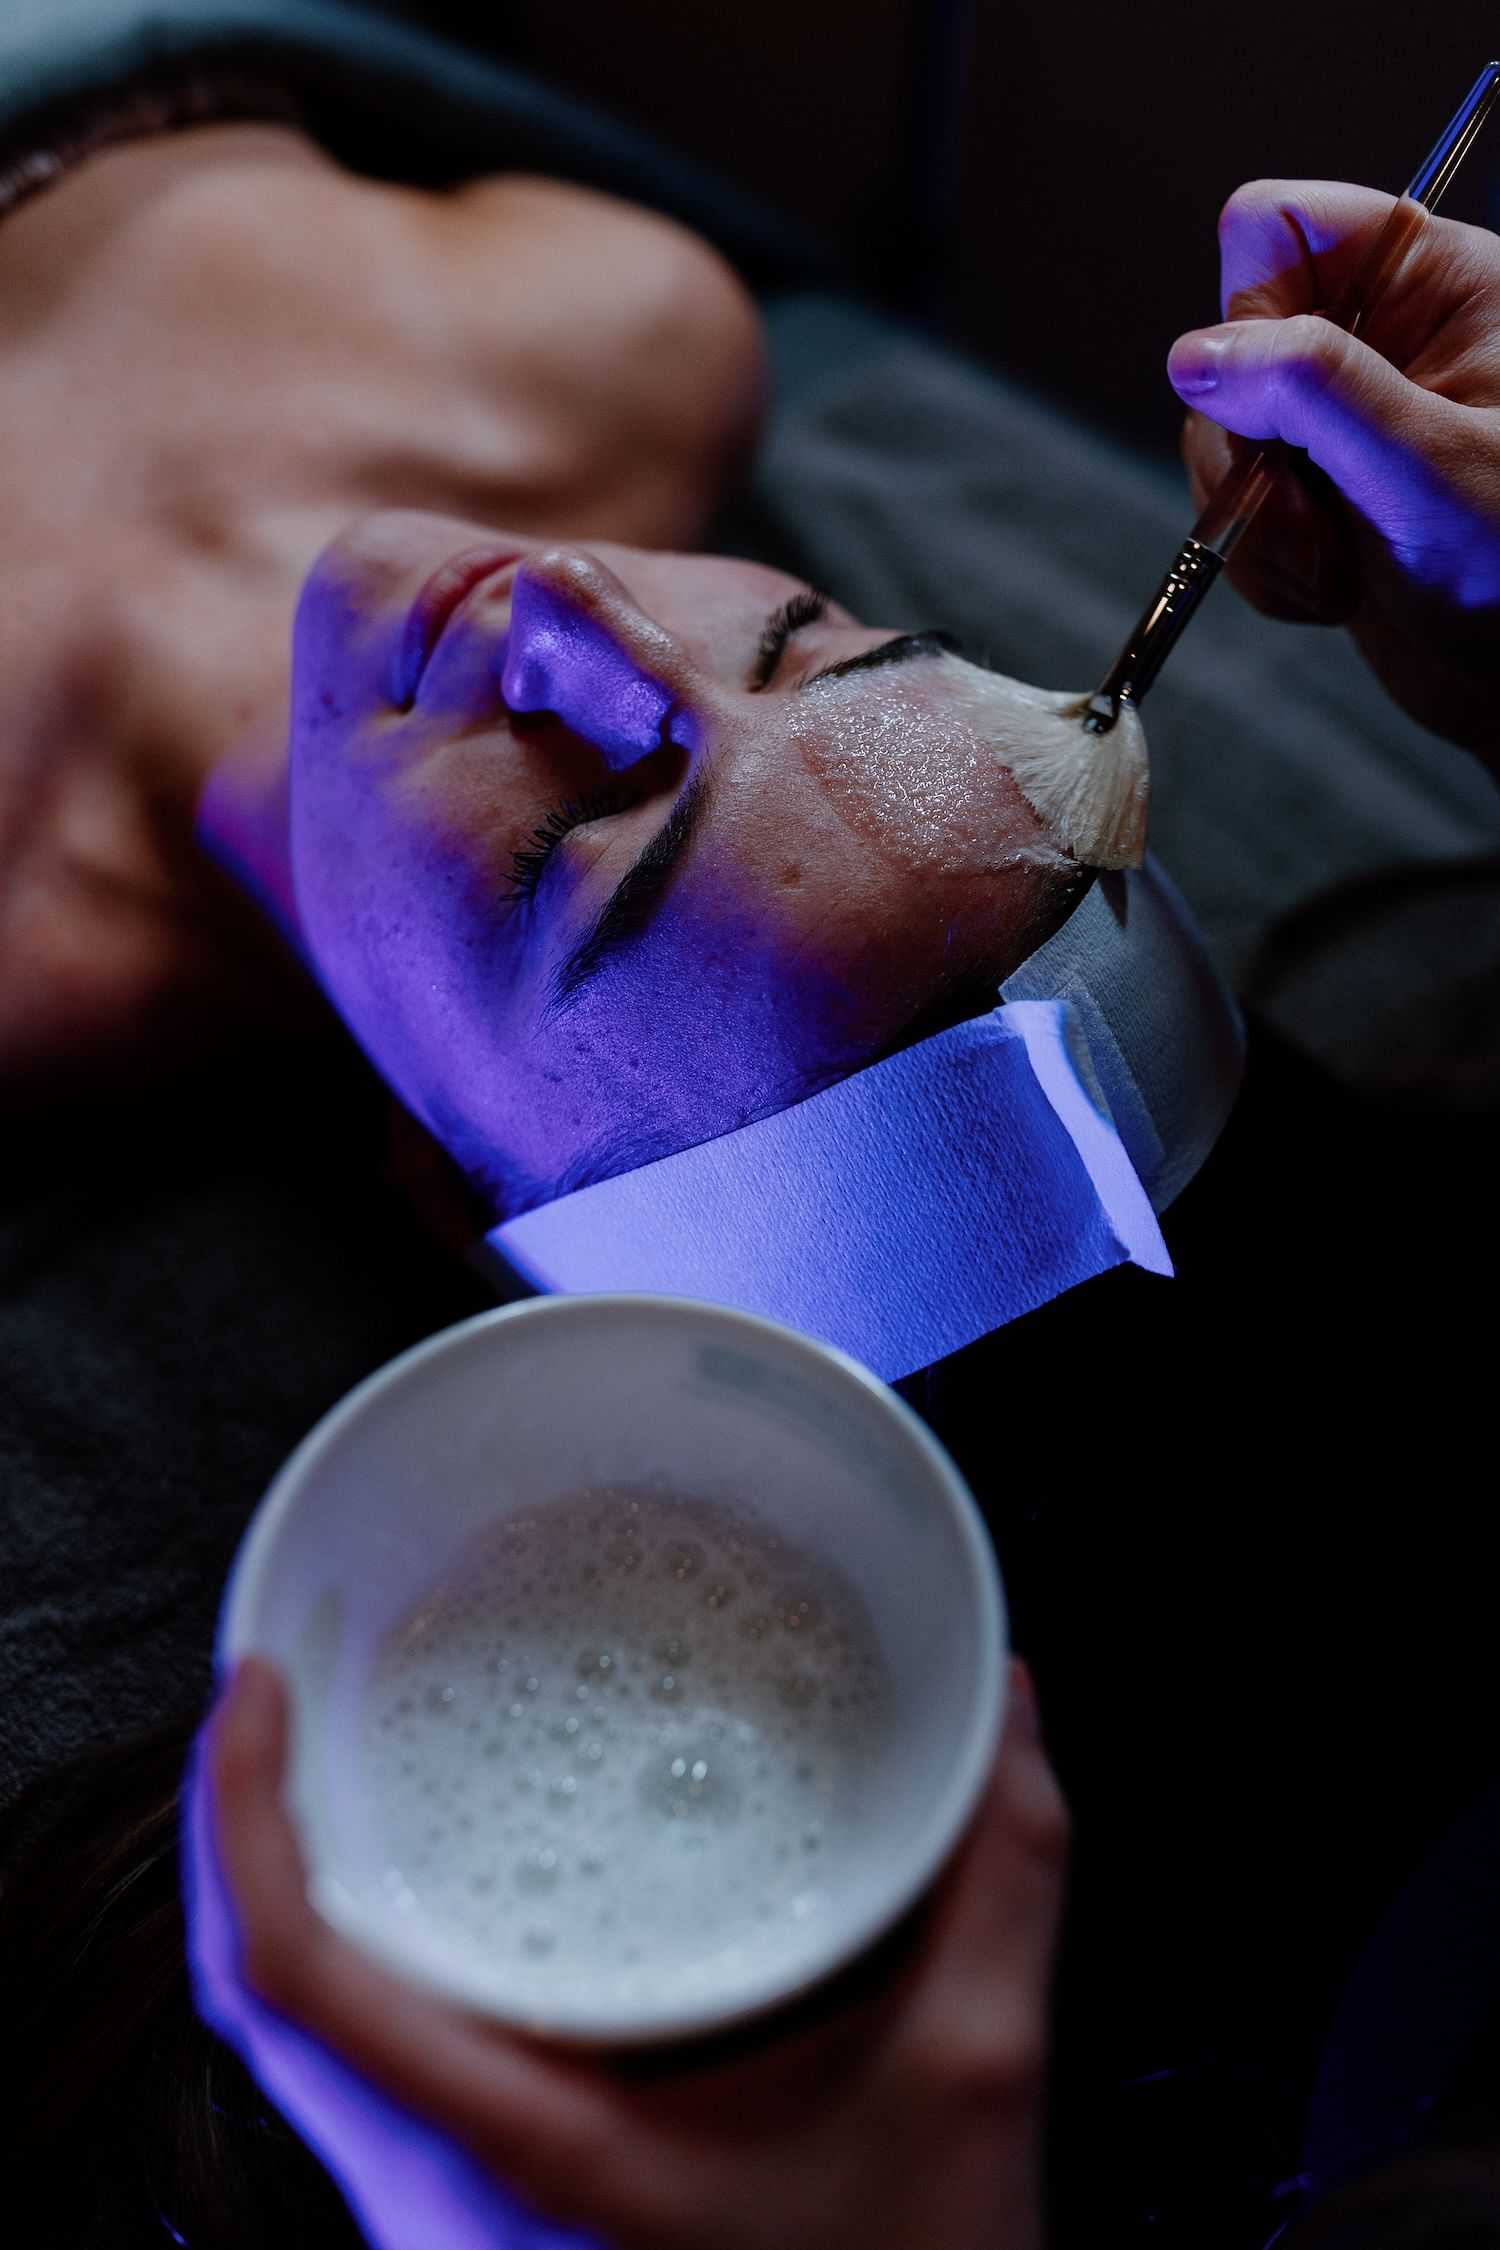 Person receiving a facial treatment with a purple mask.